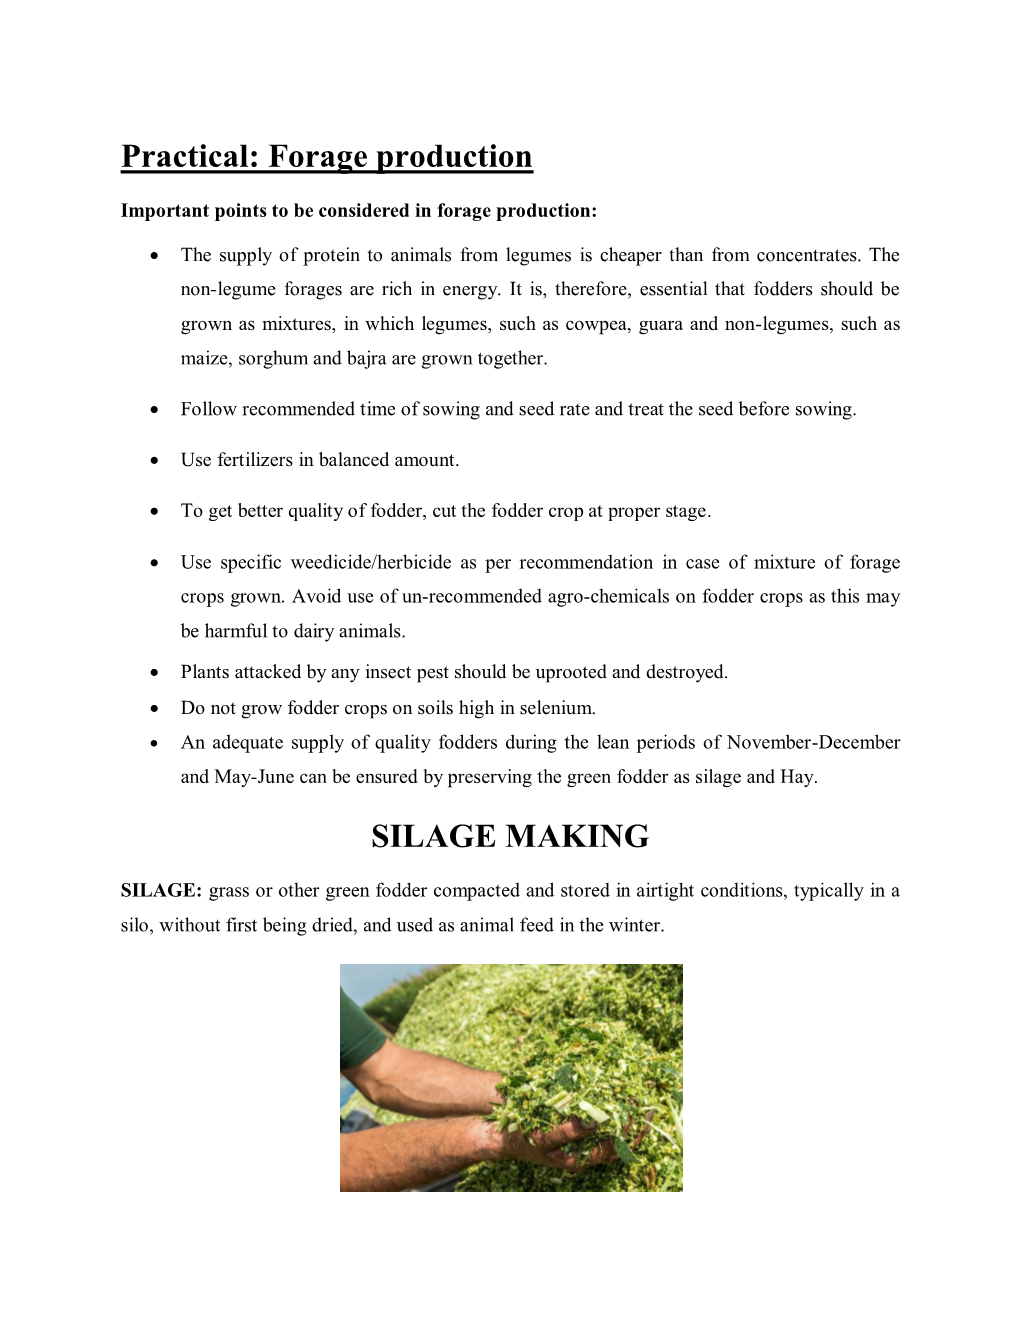 Practical: Forage Production SILAGE MAKING